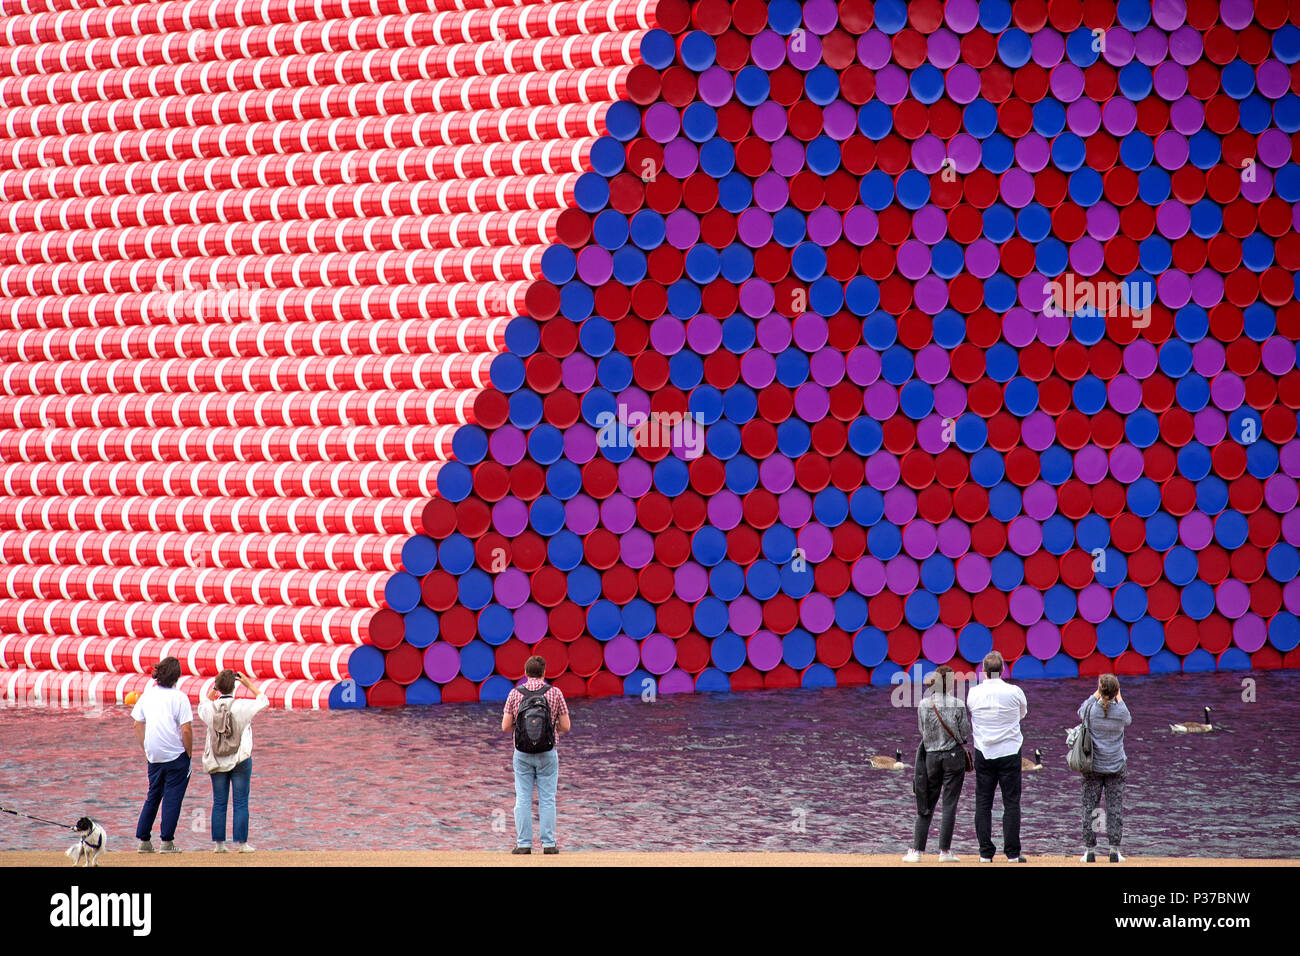 People looking at Christo's first UK outdoor work, The Mastaba, a 20m high installation made up of 7,506 horizontally stacked barrels and which will be 20m high, 30m wide and 40m long, to be displayed on Serpentine Lake until 23 September 2018. Stock Photo